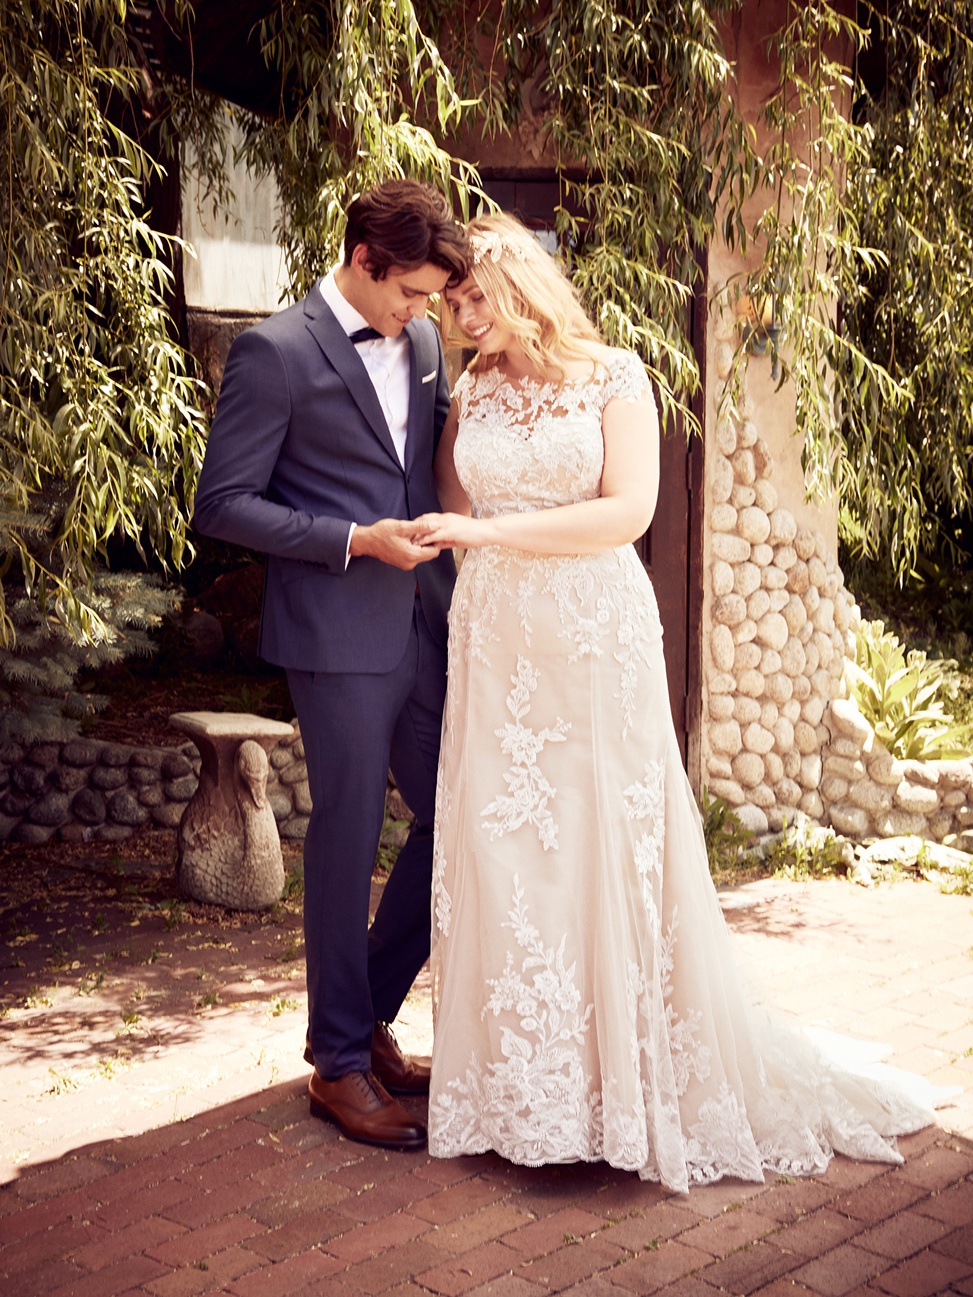 a couple embraces in front of a building covered in vines. The bride is wearing the liesl lynette gown by Rebecca Ingram